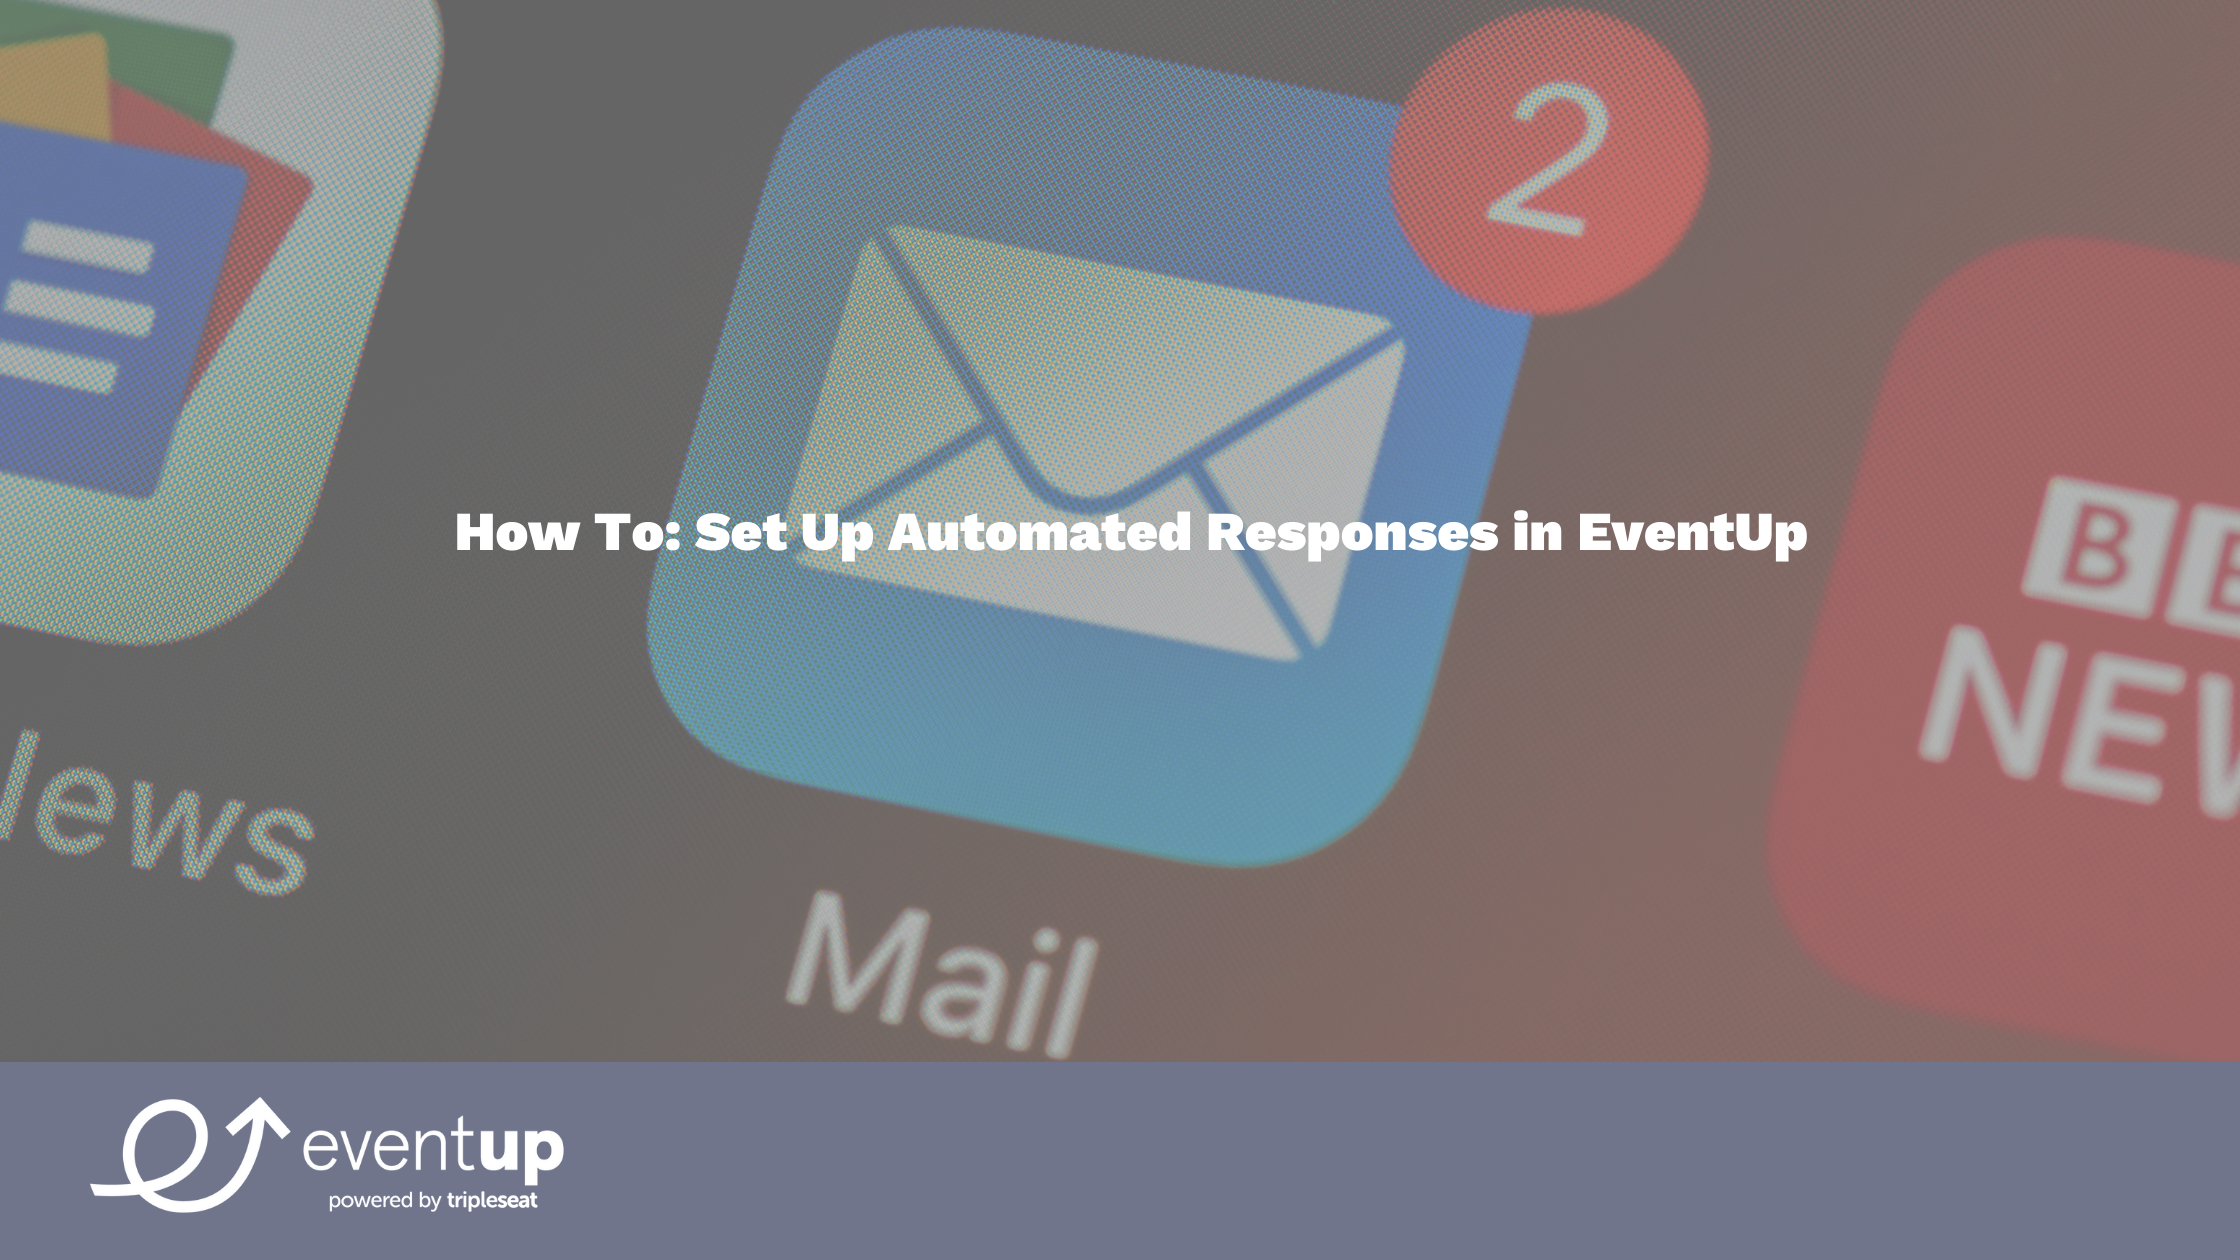 How To: Set Up Automated Responses in EventUp